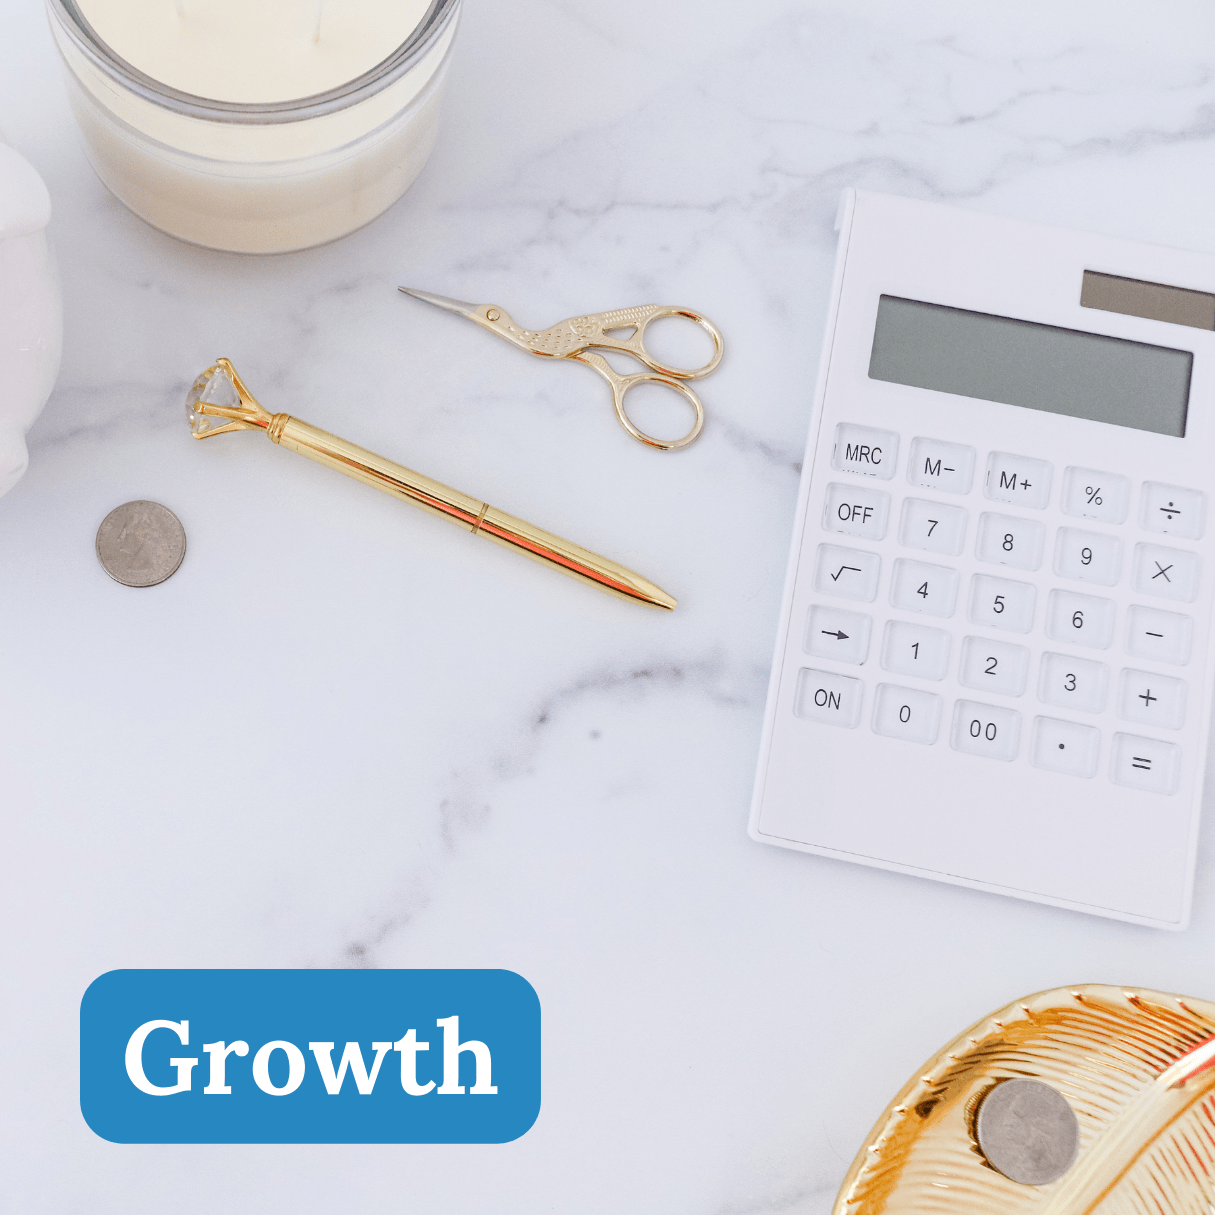 An image showcasing a calculator and pen on a desk with the words titled "Growth."